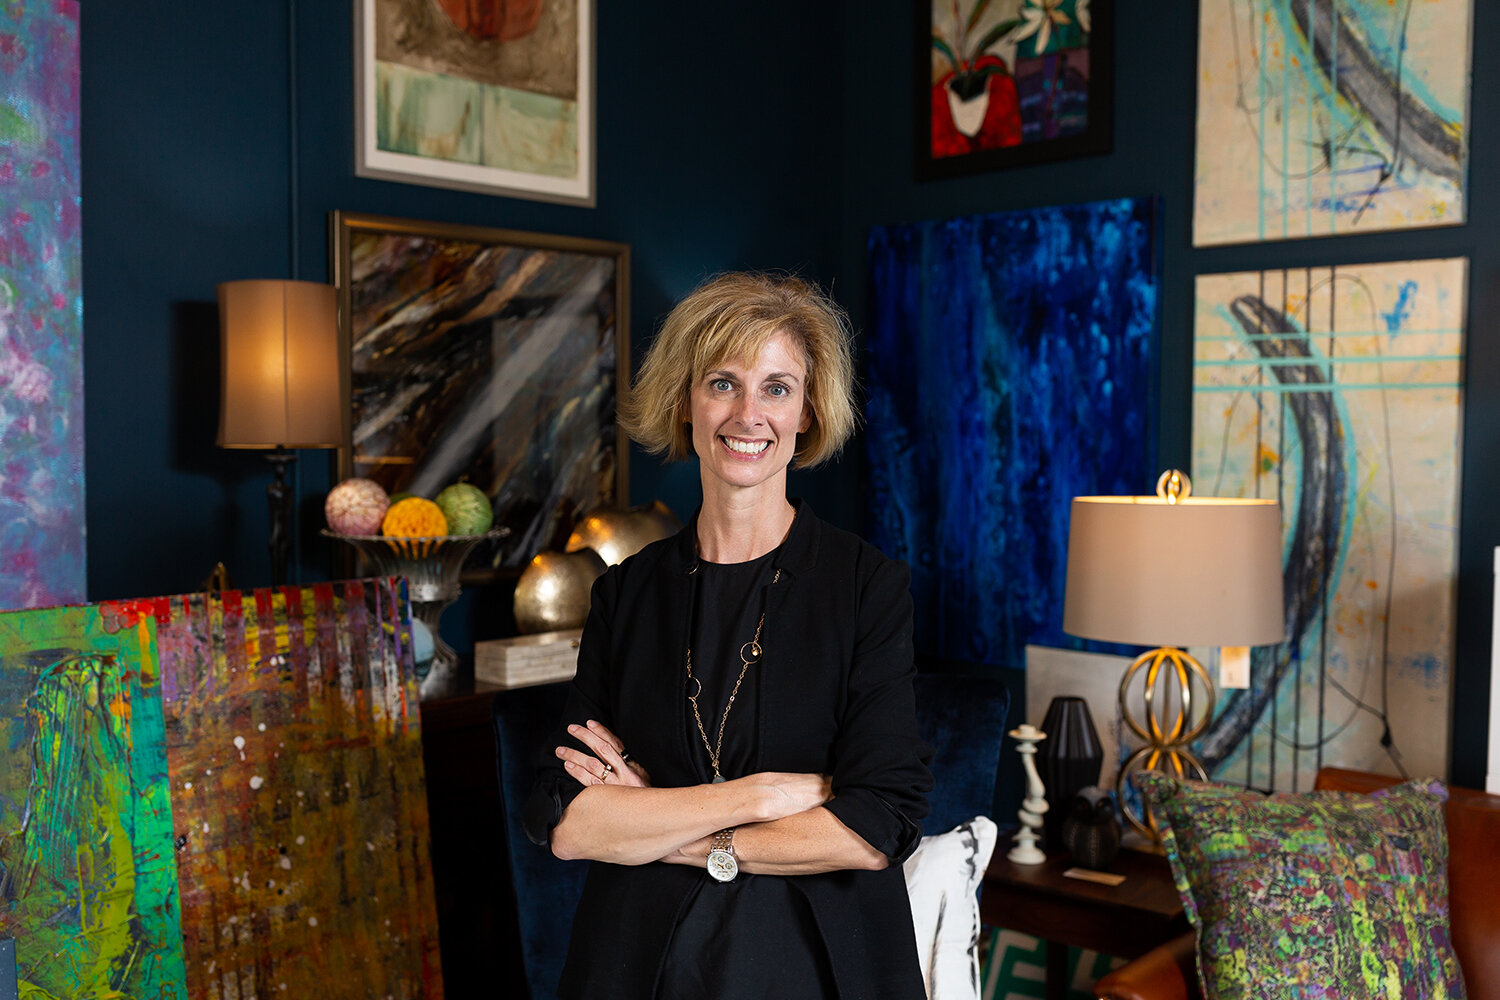  Jan Finlayson, the owner of Luxe Interiors stands in her shop in Iowa City on Thursday, Sep. 6, 2018.  